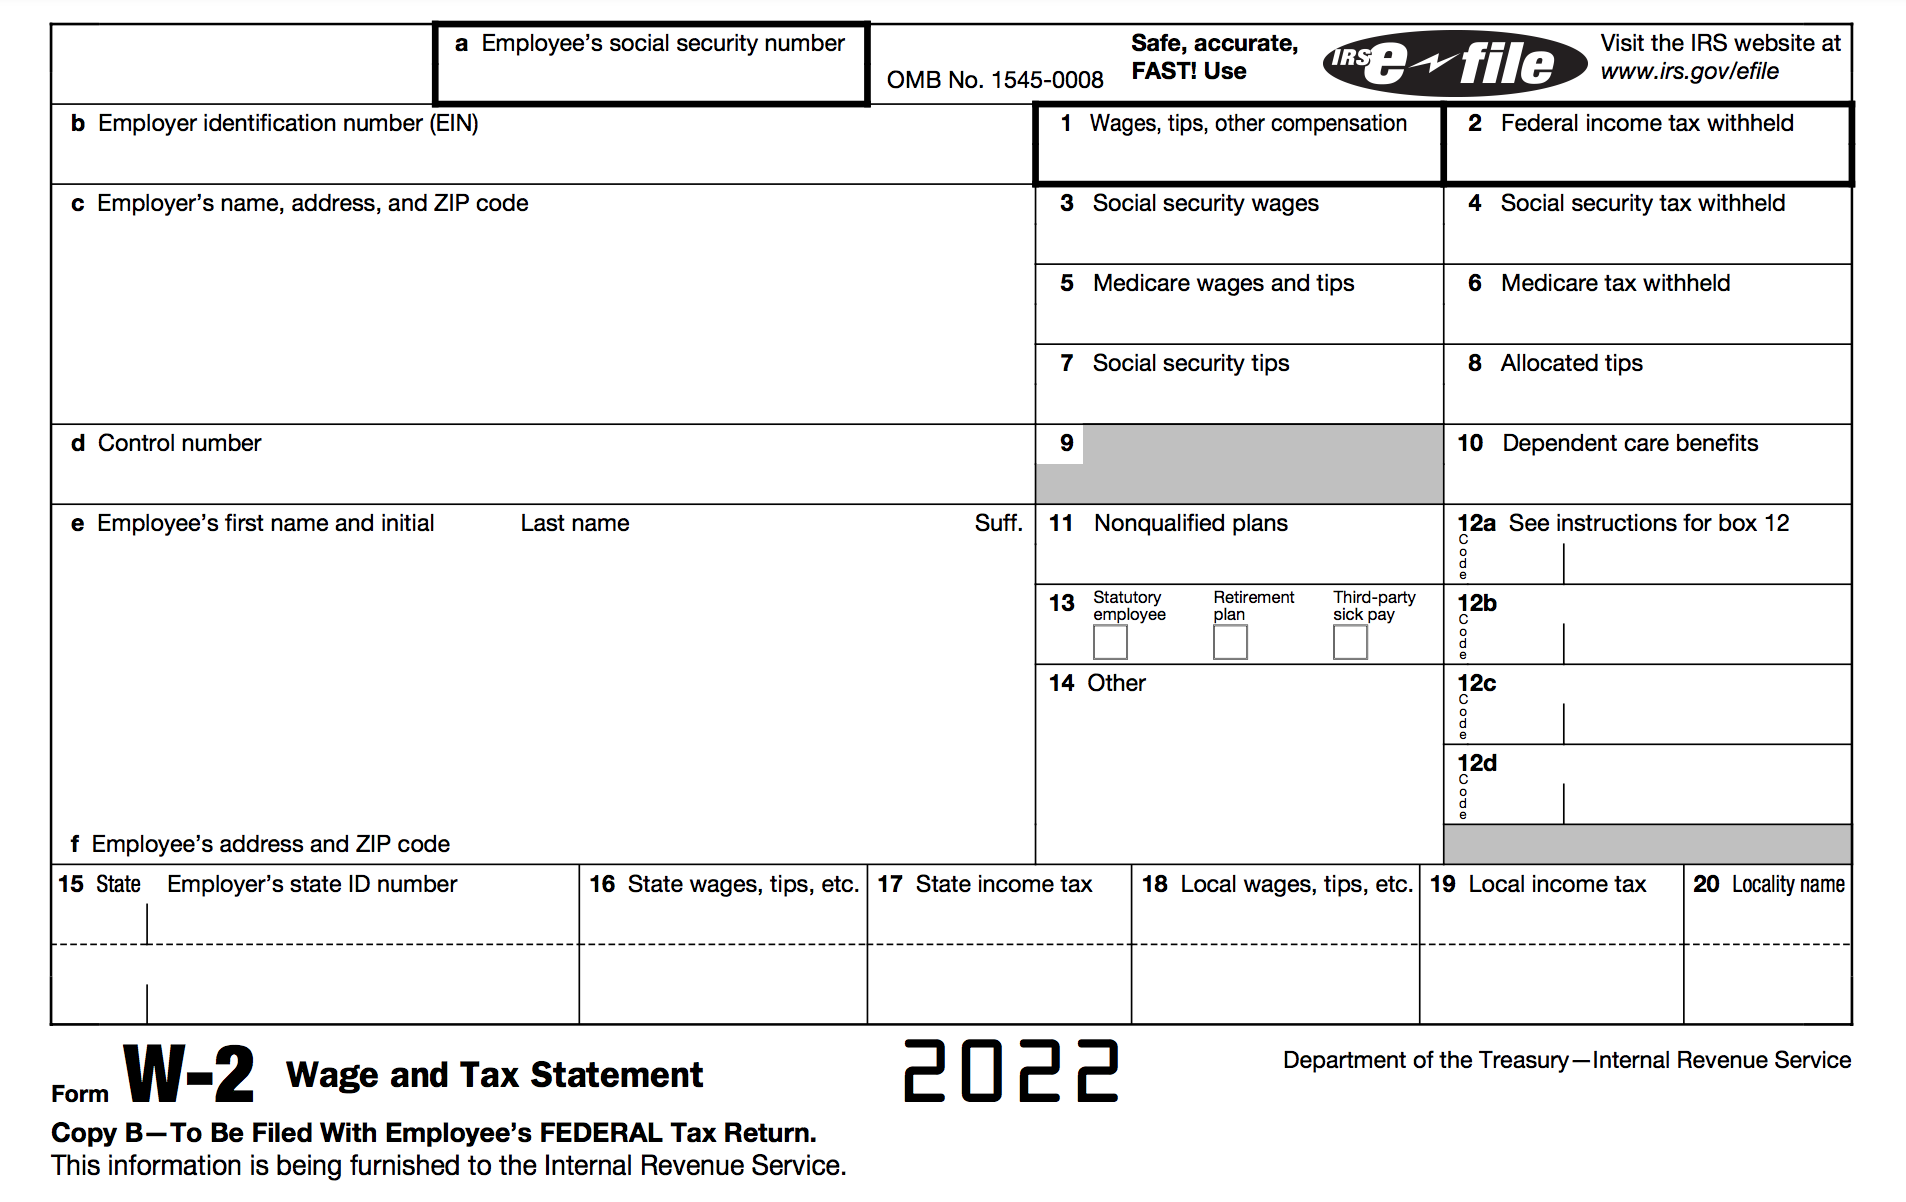 How To Fill Out A W-2 Tax Form | Smartasset with How To Fill Out W2 Form For New Job